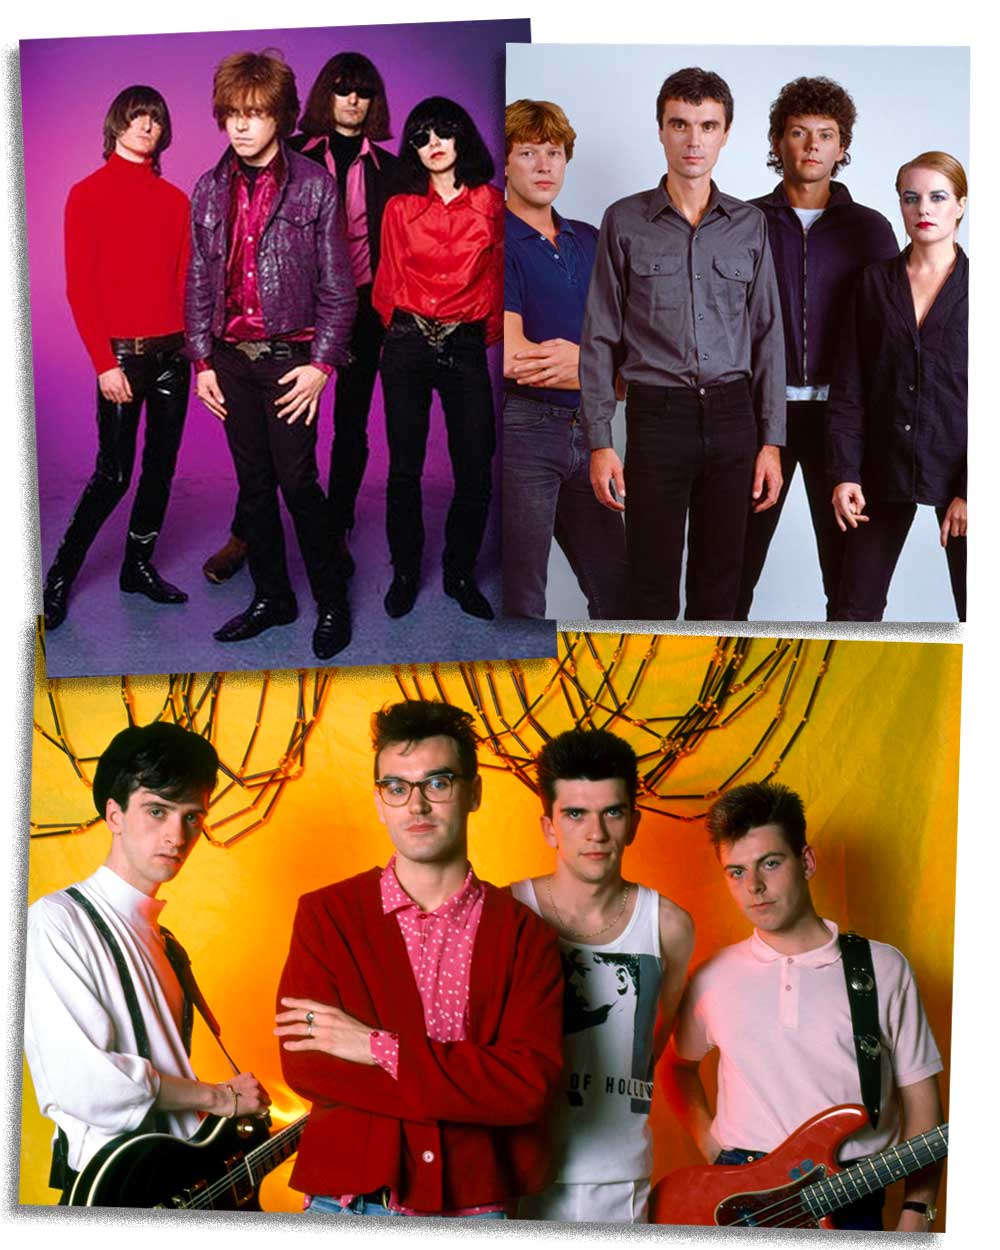 The Smiths, The Scientists, and Talking Heads Post-Punk fashion